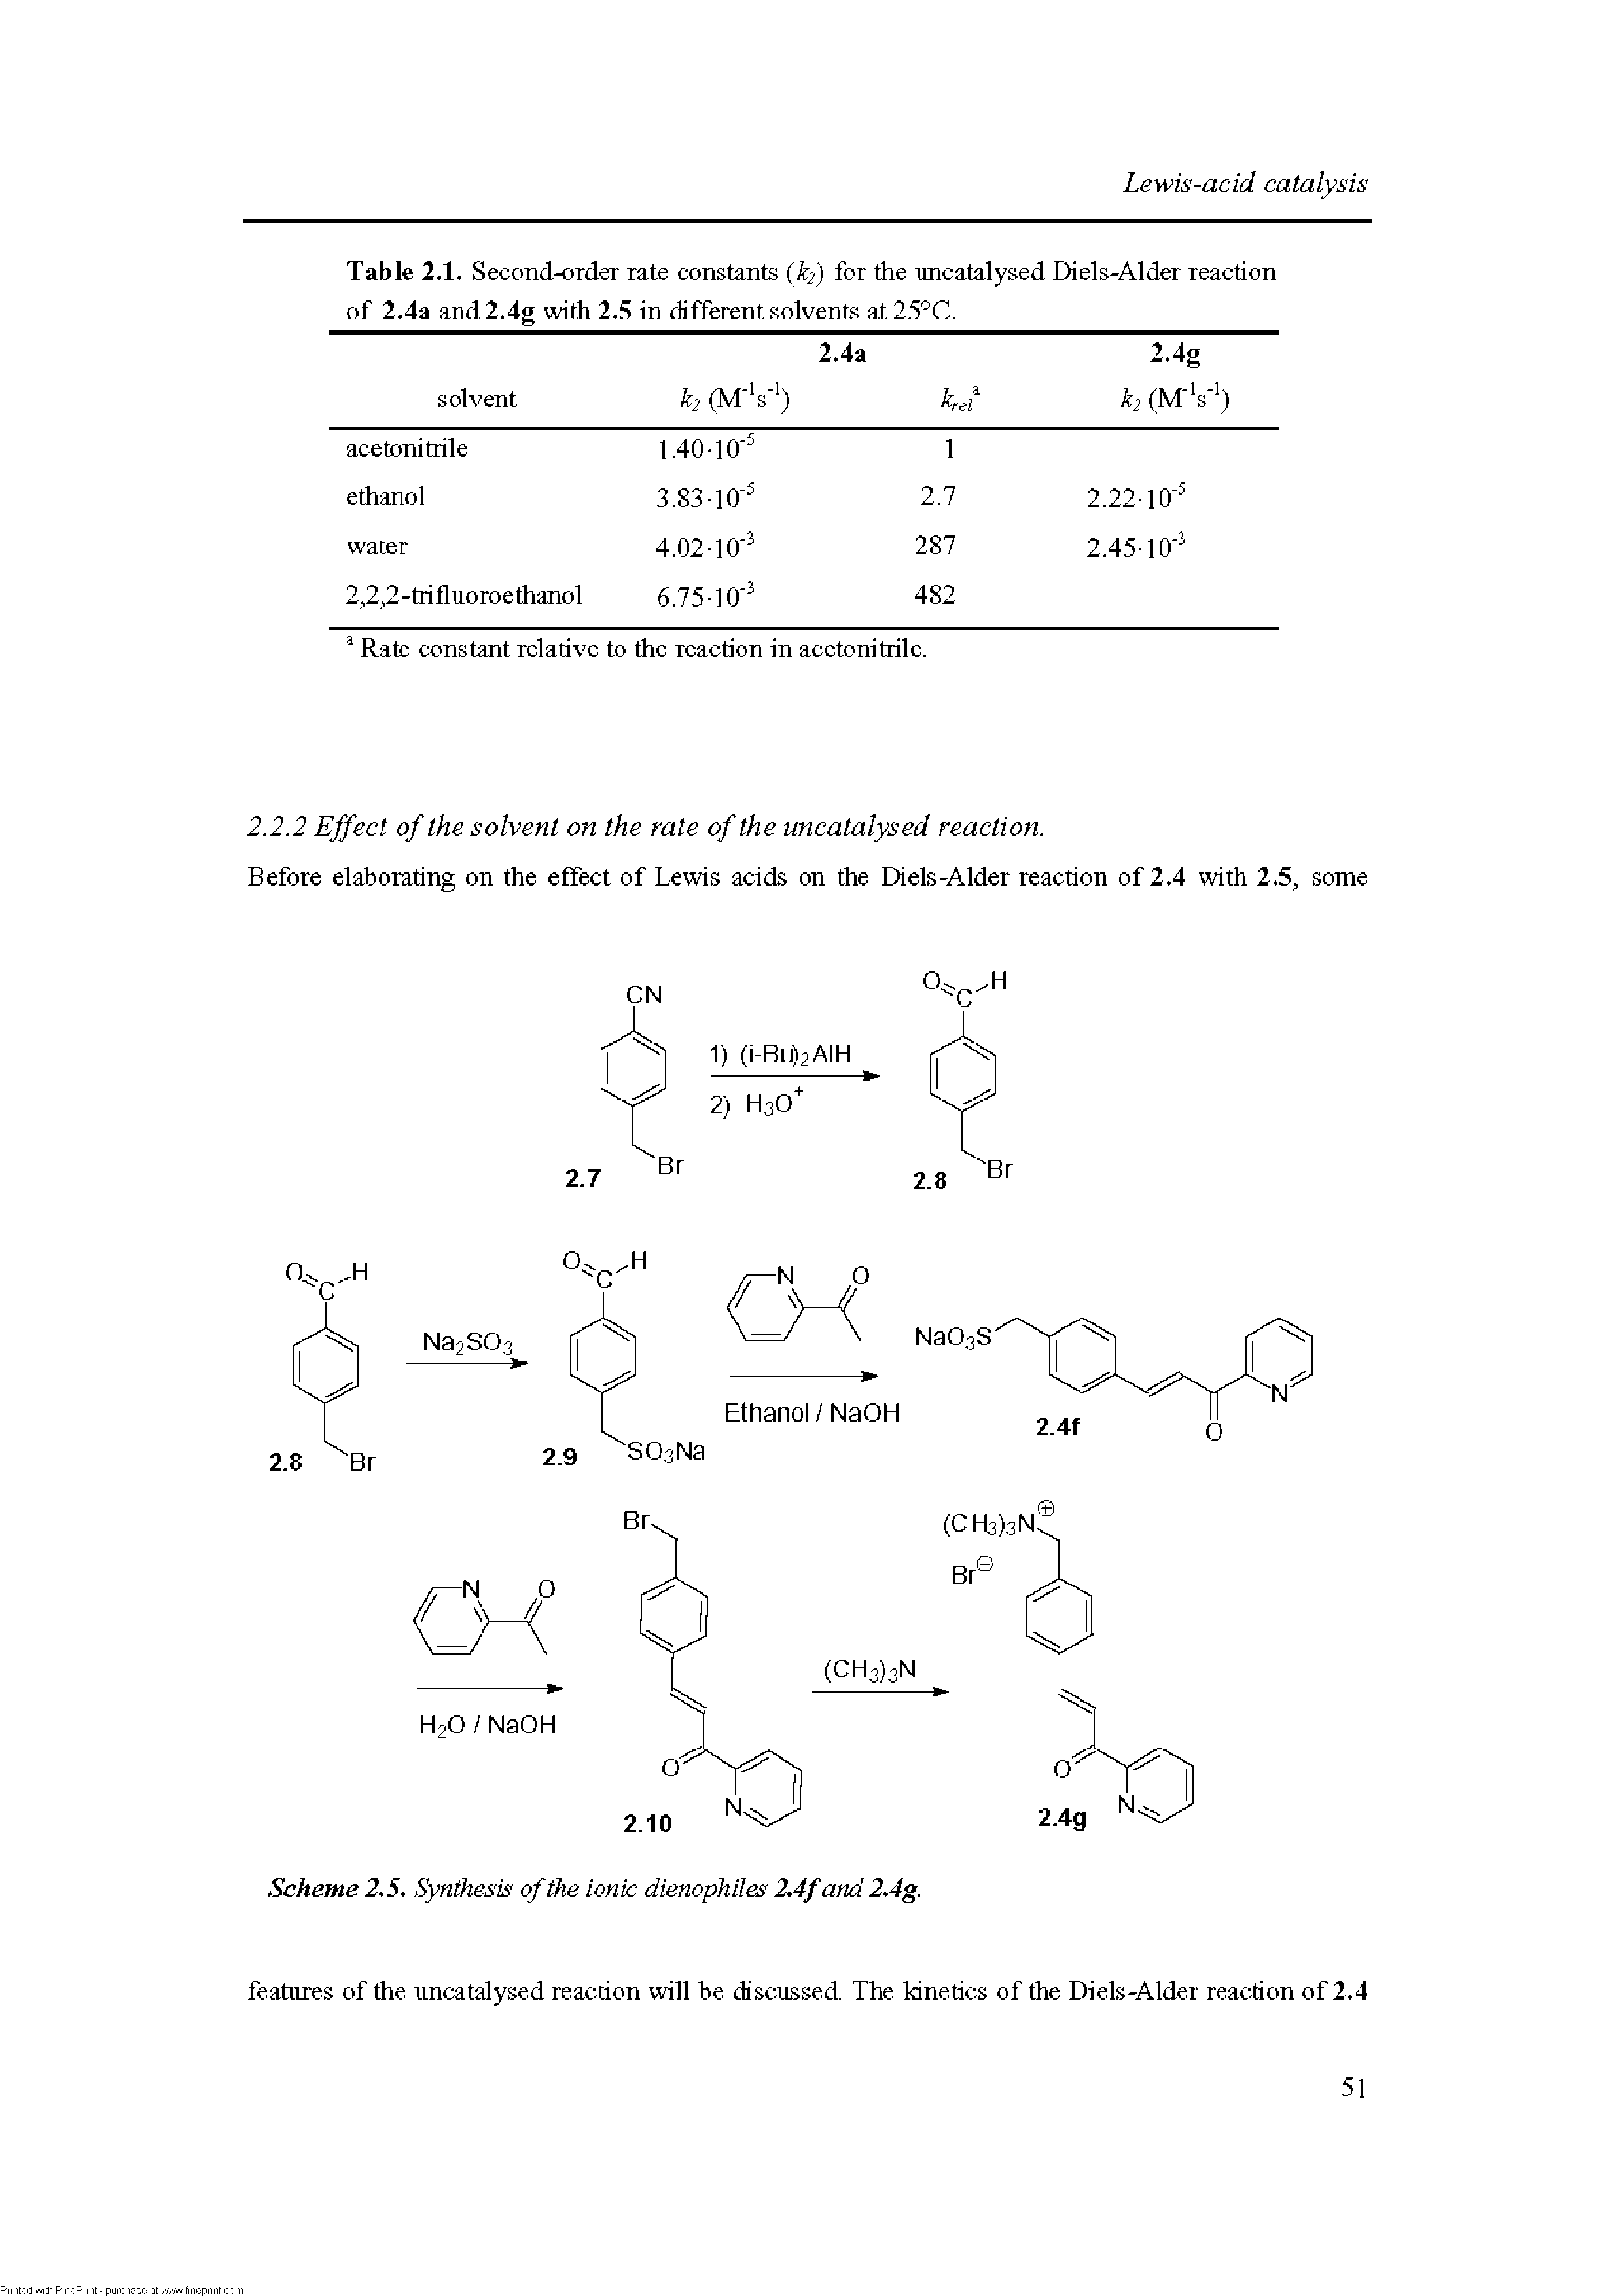 Table 2,1, Second-order rate constants (k2) for the nncatalysed Diels-Alder reaction of 2,4a and2.4g with 2,5 in different solvents at 25 - C.